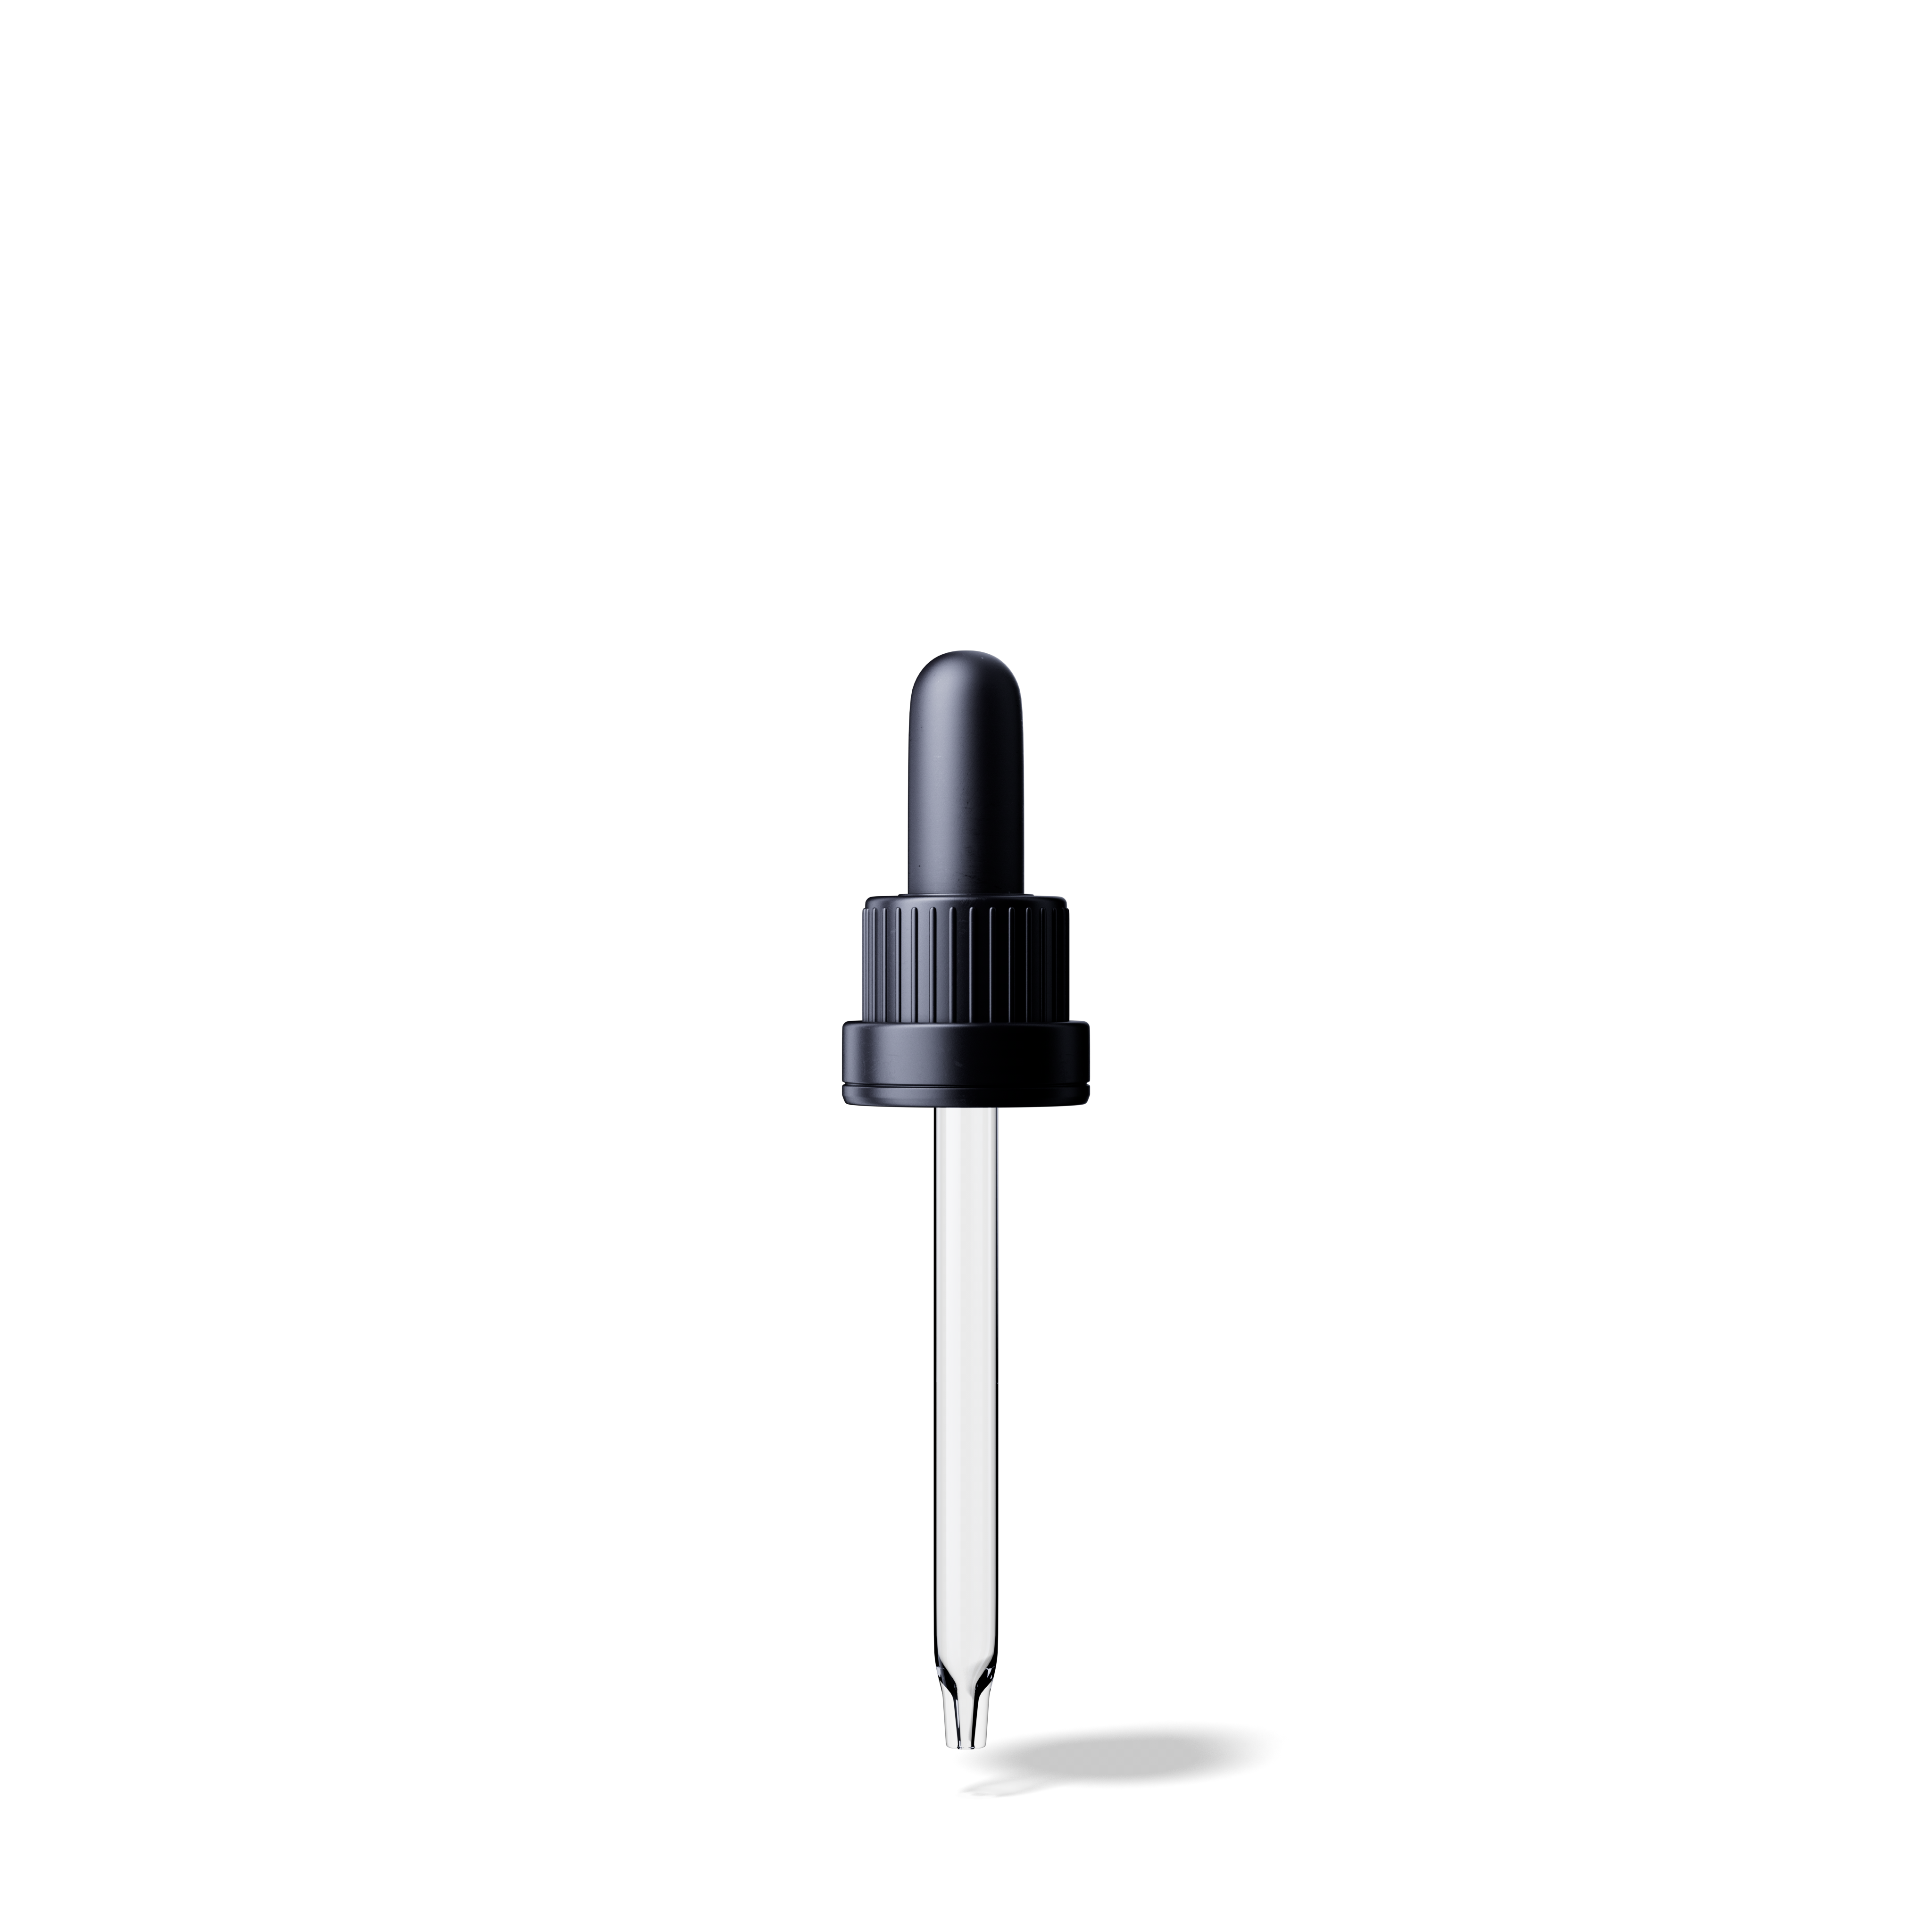 Pipette tamper evident DIN18, III, black, ribbed, bulb NBR, dose 1.0ml, conical tip (Orion 30)